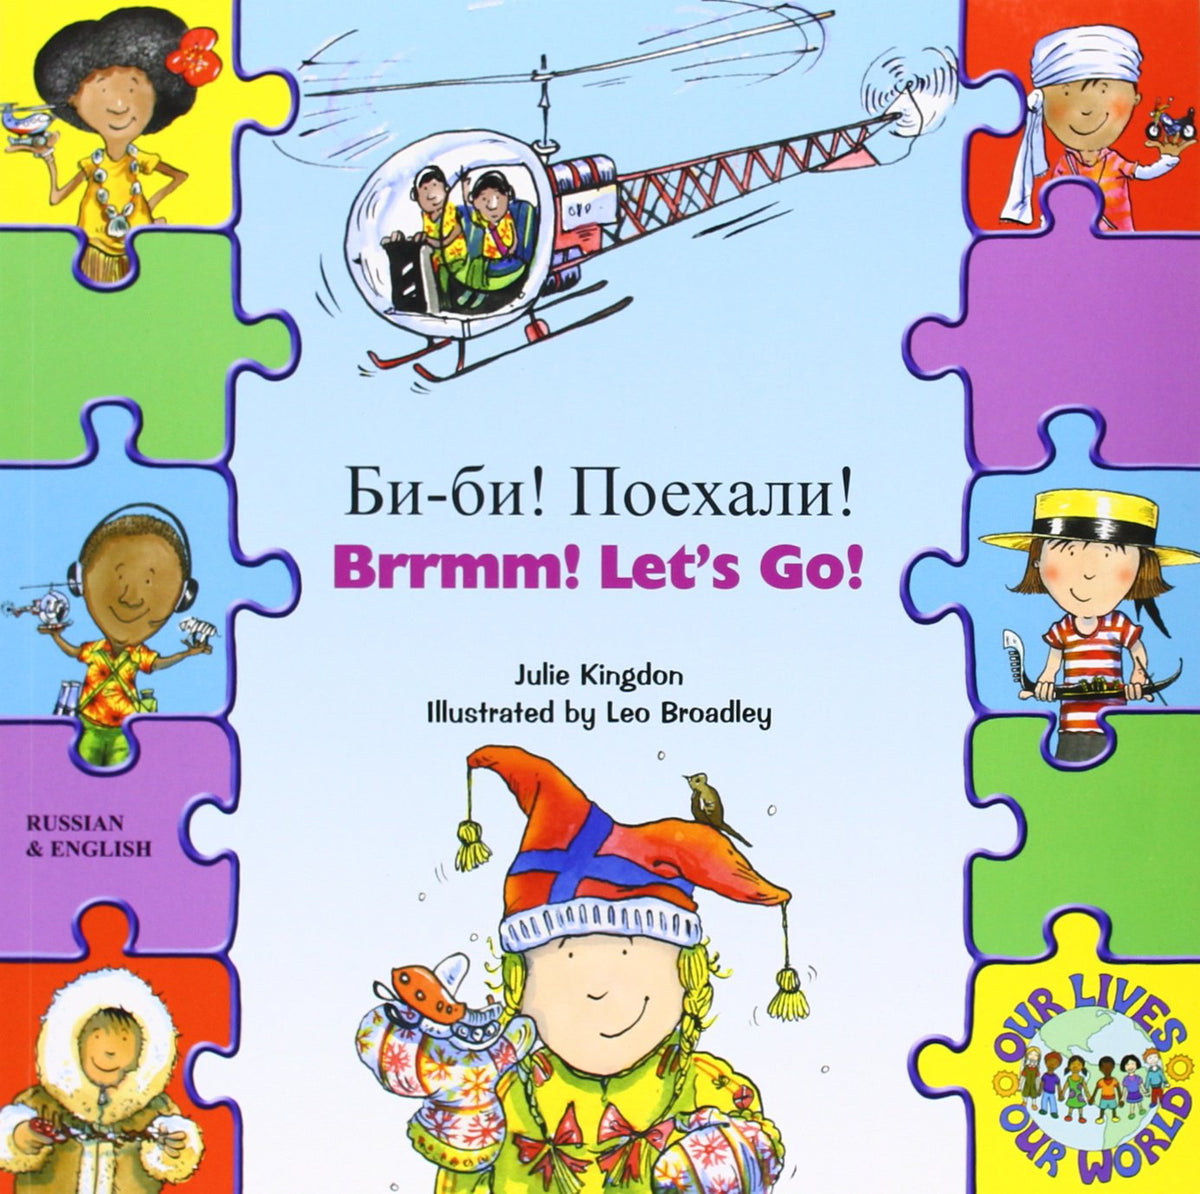 Brrmm! Let's Go! In Russian and English (Our Lives, Our World!)